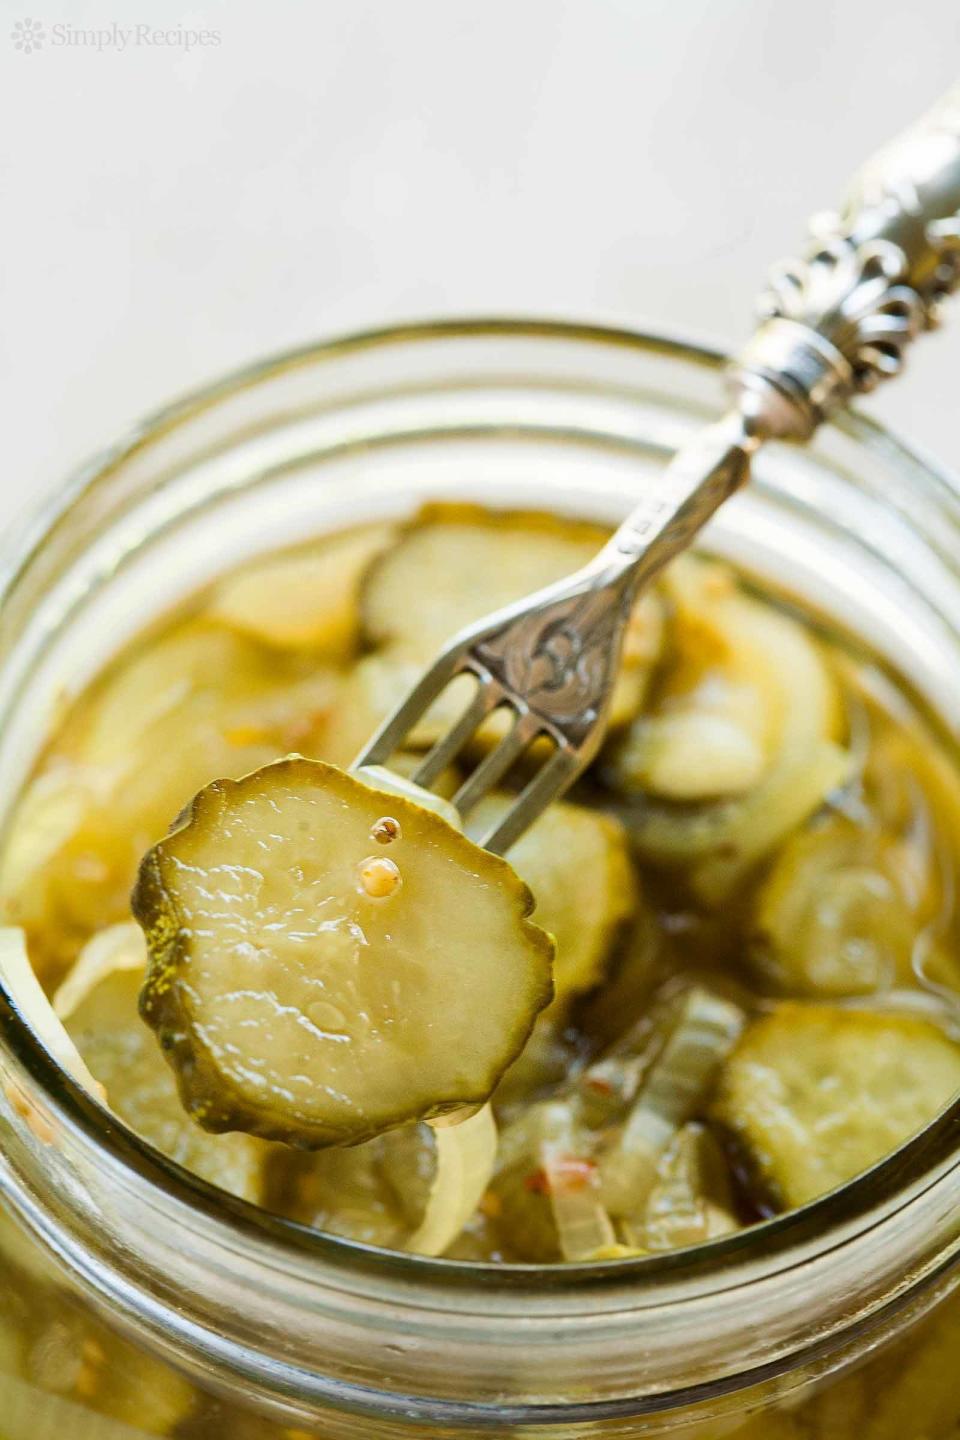 <strong>Get the <a href="http://www.simplyrecipes.com/recipes/bread_and_butter_pickles/" target="_blank">Bread And Butter Pickles recipe</a>&nbsp;from Simply Recipes</strong>